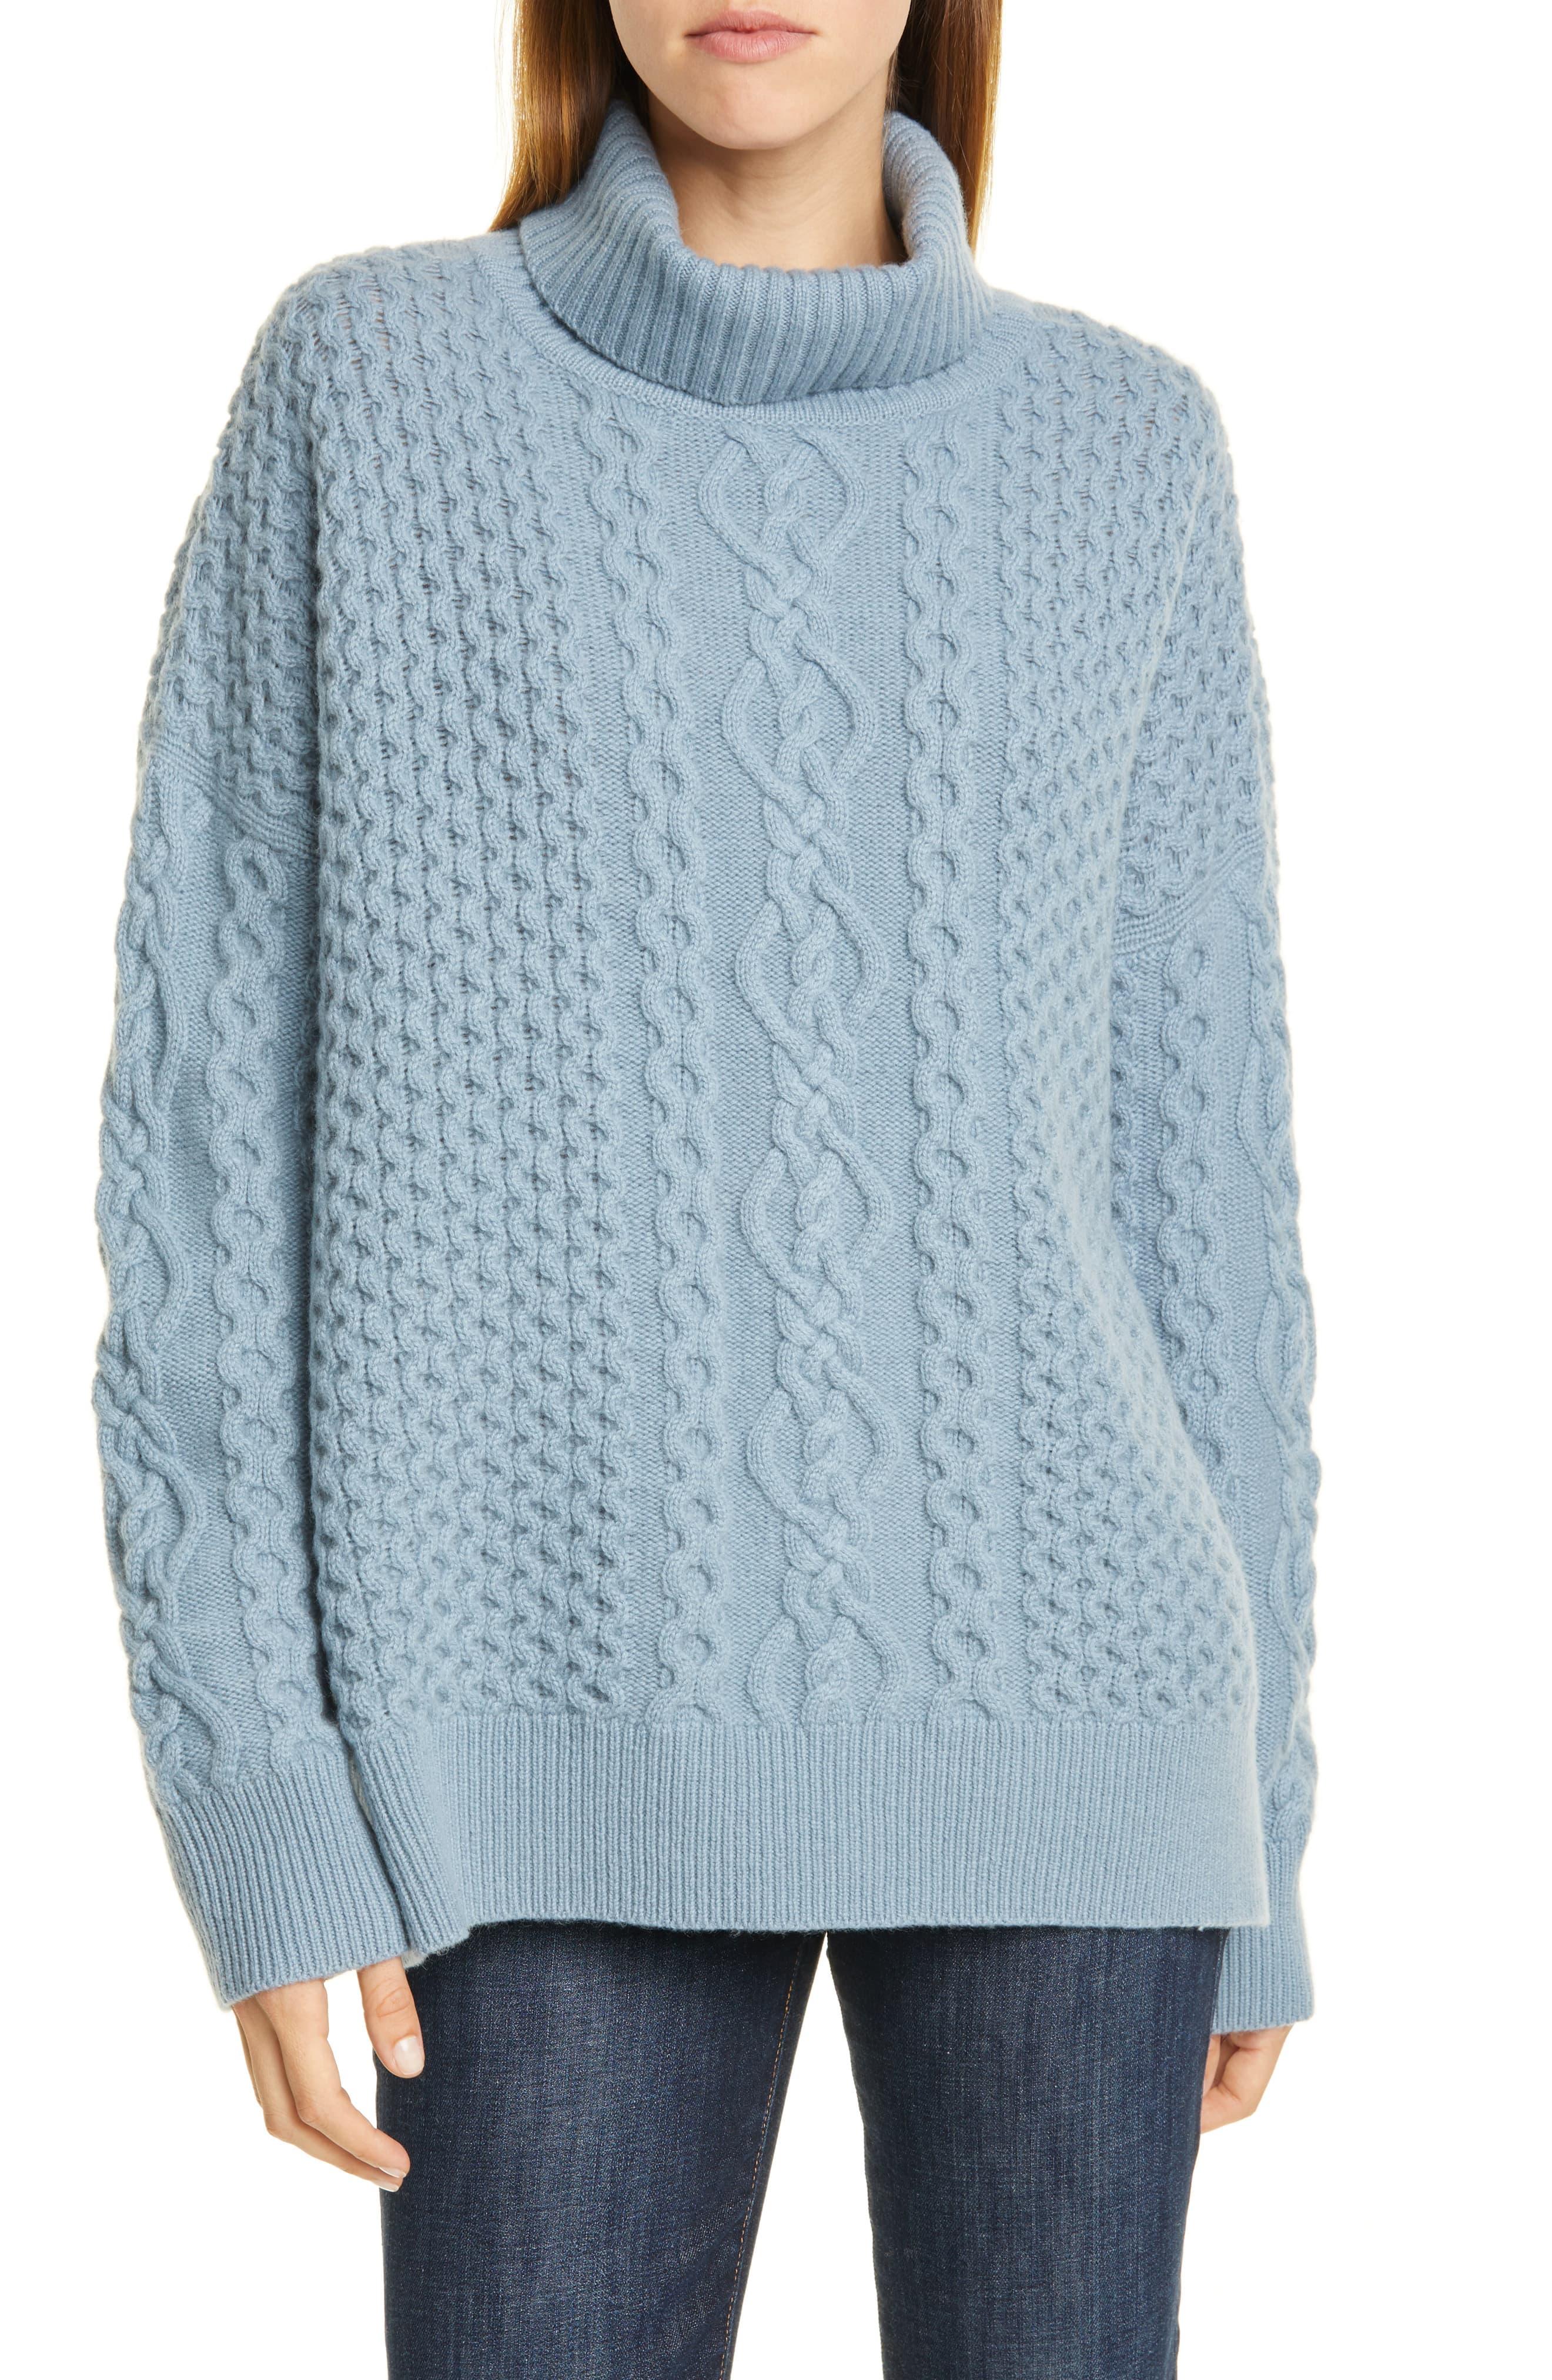 Nordstrom Oversize Cable Knit Cashmere Turtleneck Sweater in Blue ...